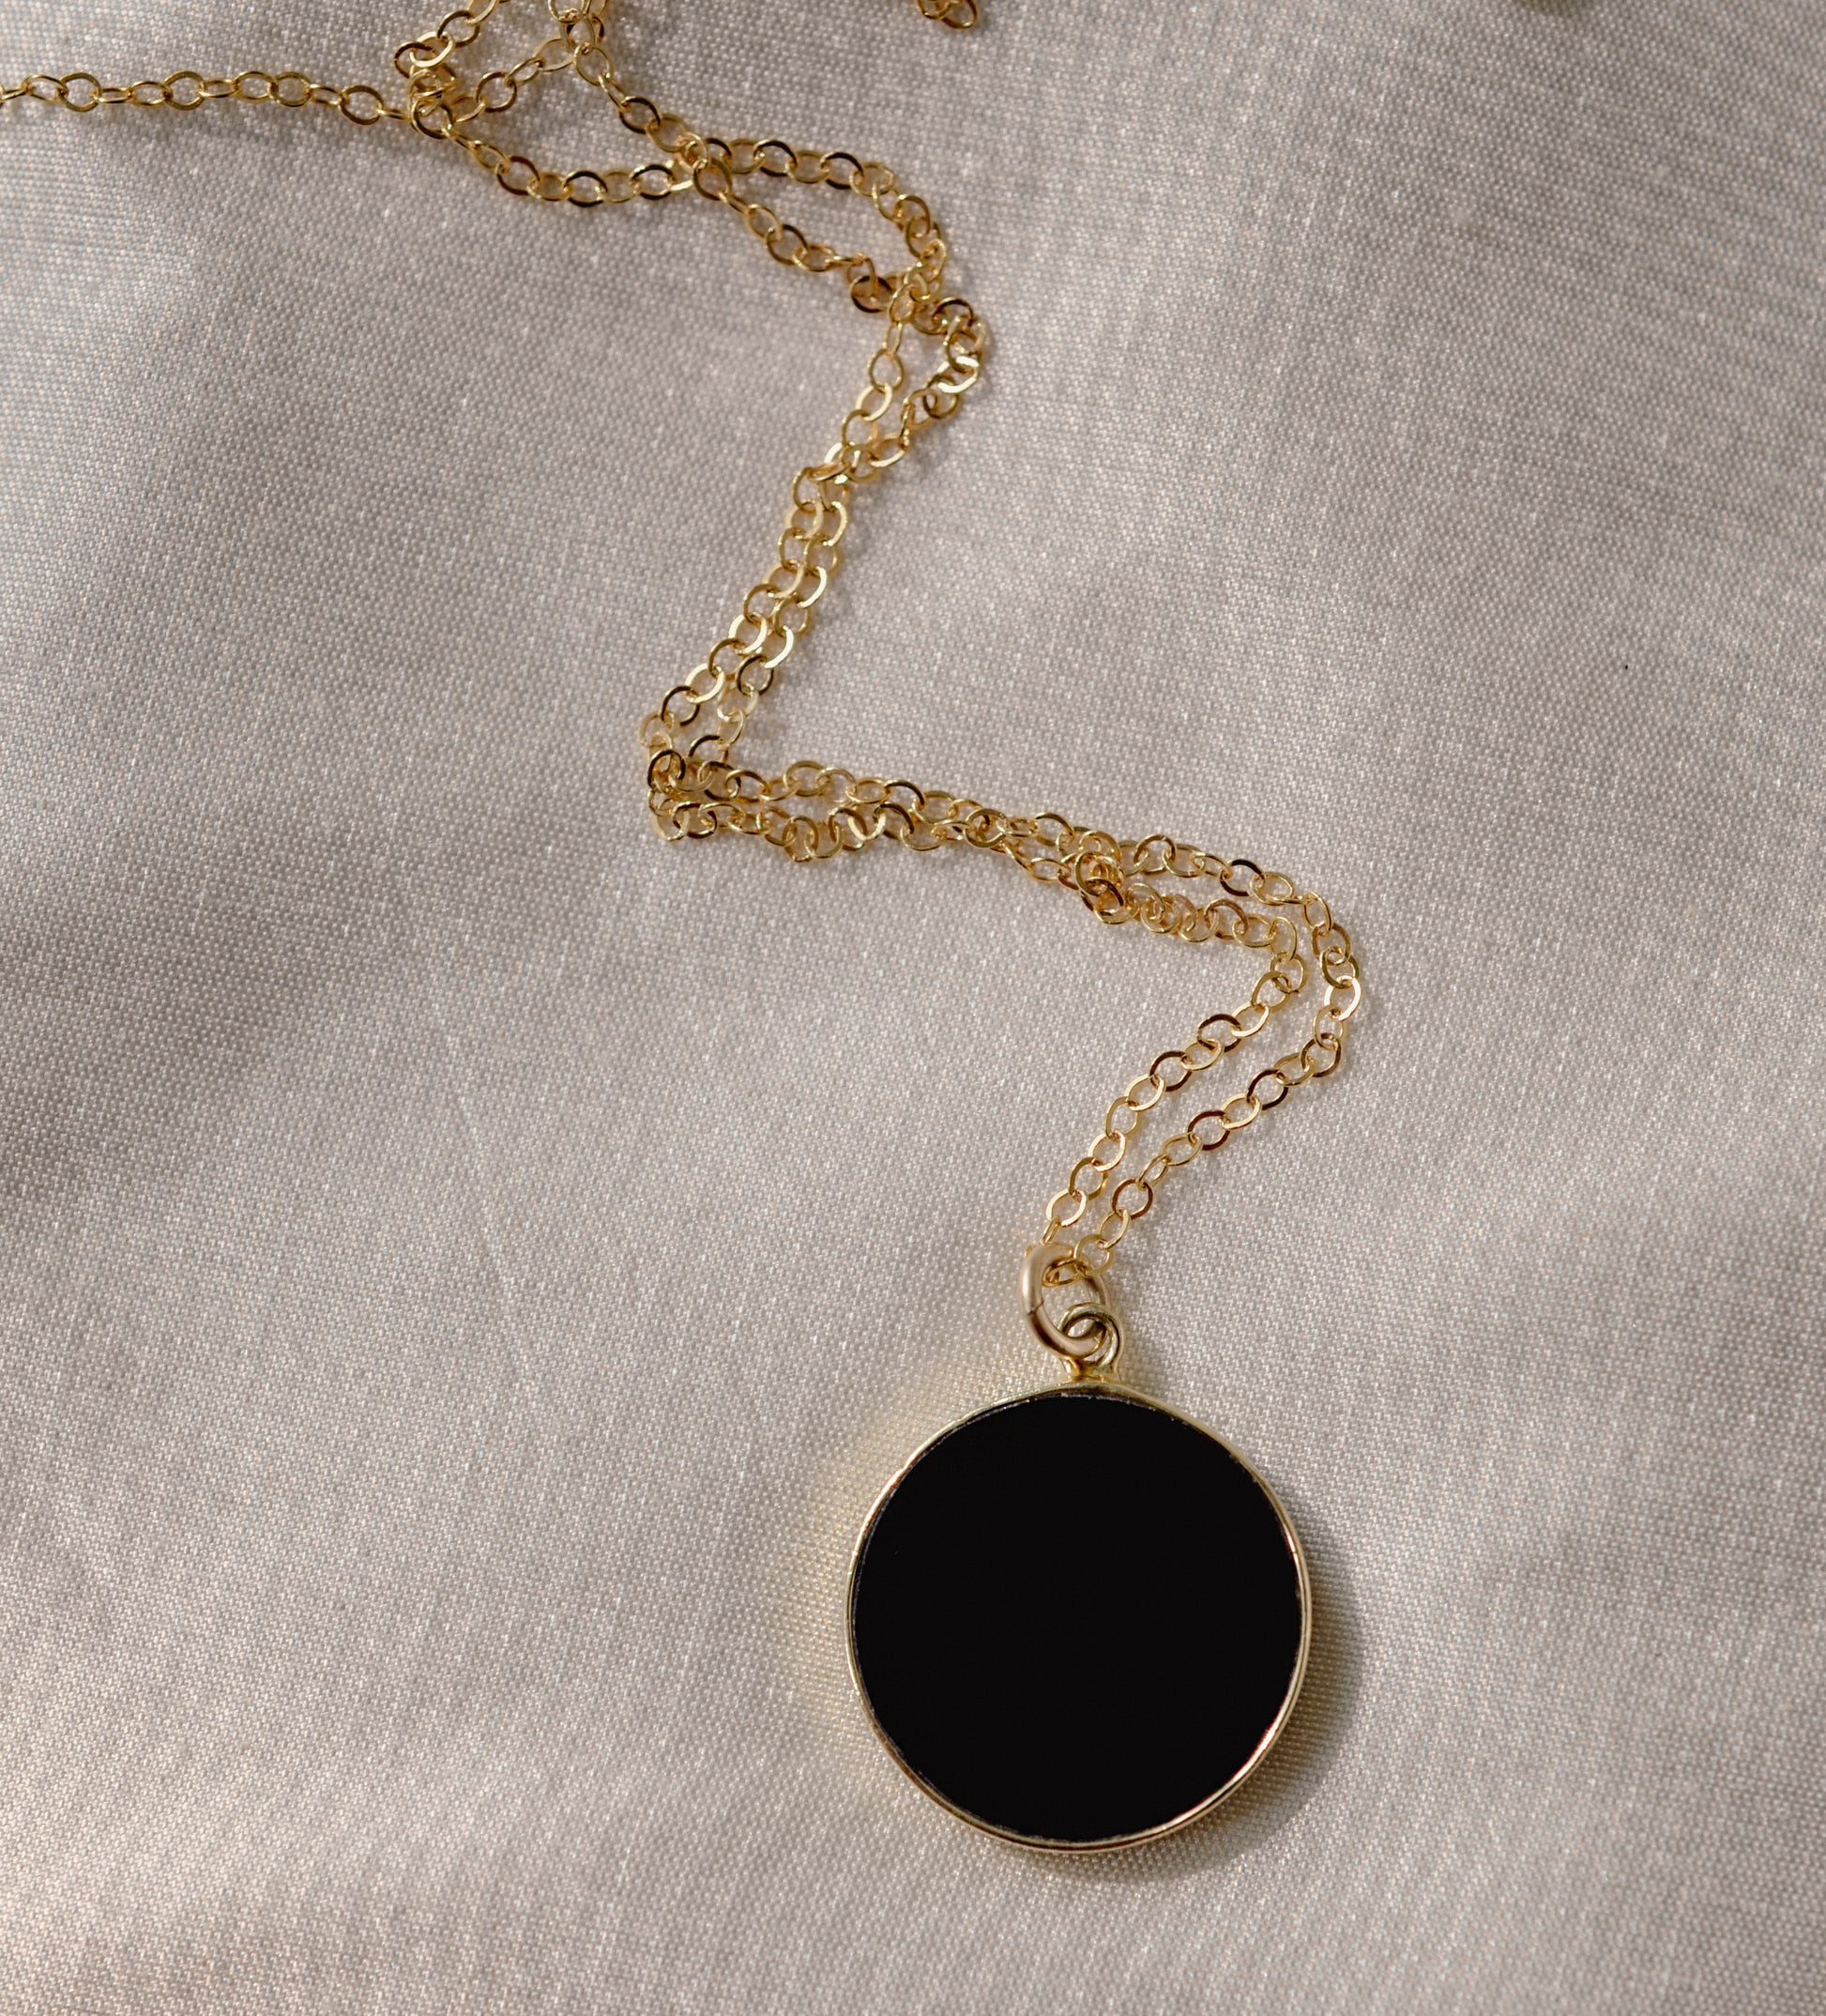 Smooth Polished Black Onyx Circle Pendant on Simple Gold Chain. 